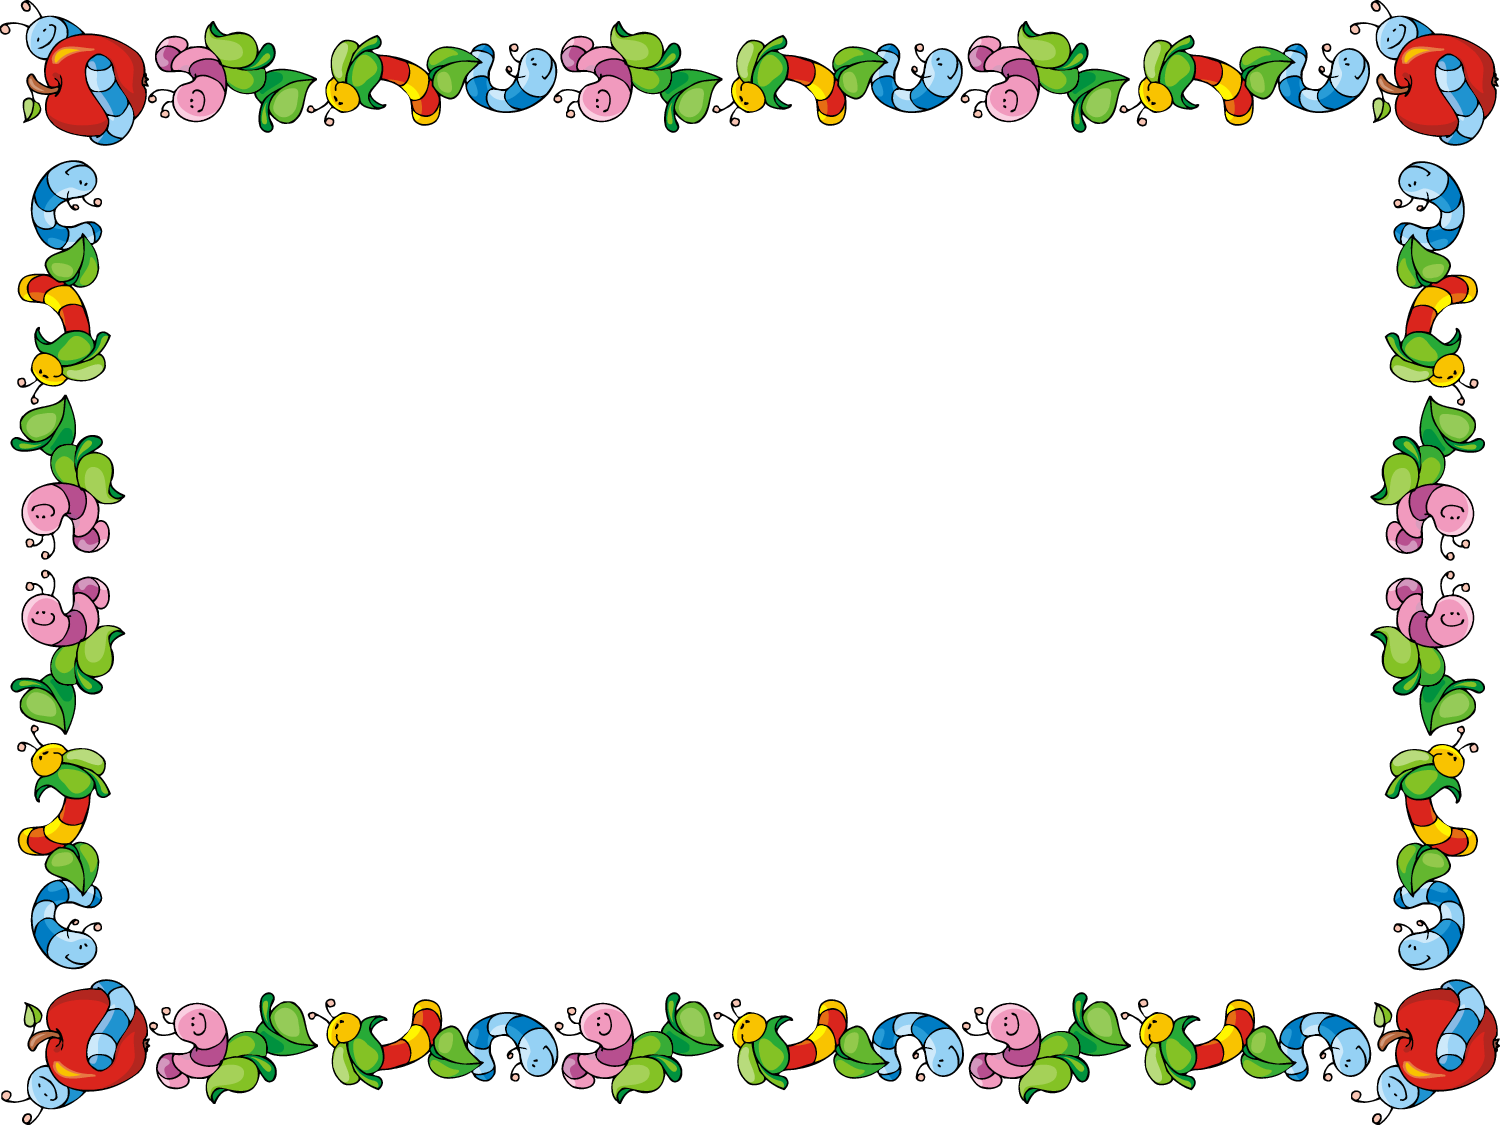 11 Frames And Borders In Ppt Free Cliparts That You Can Download To